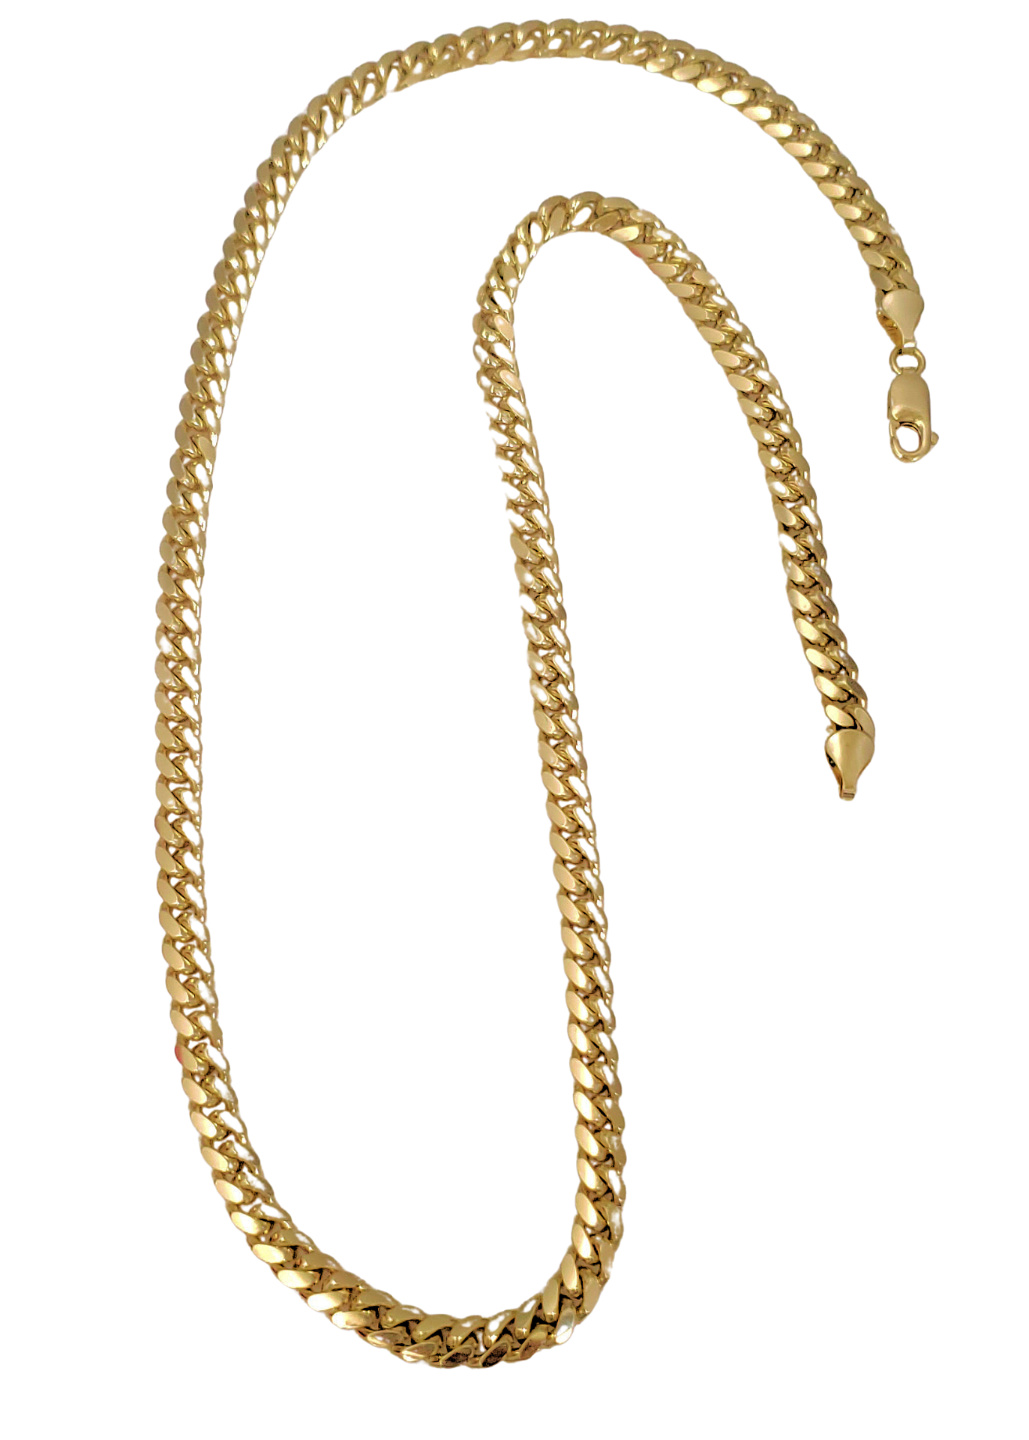 Mens 14K Yellow Gold 9.5mm Hollow Curb Link Chain Necklace 20